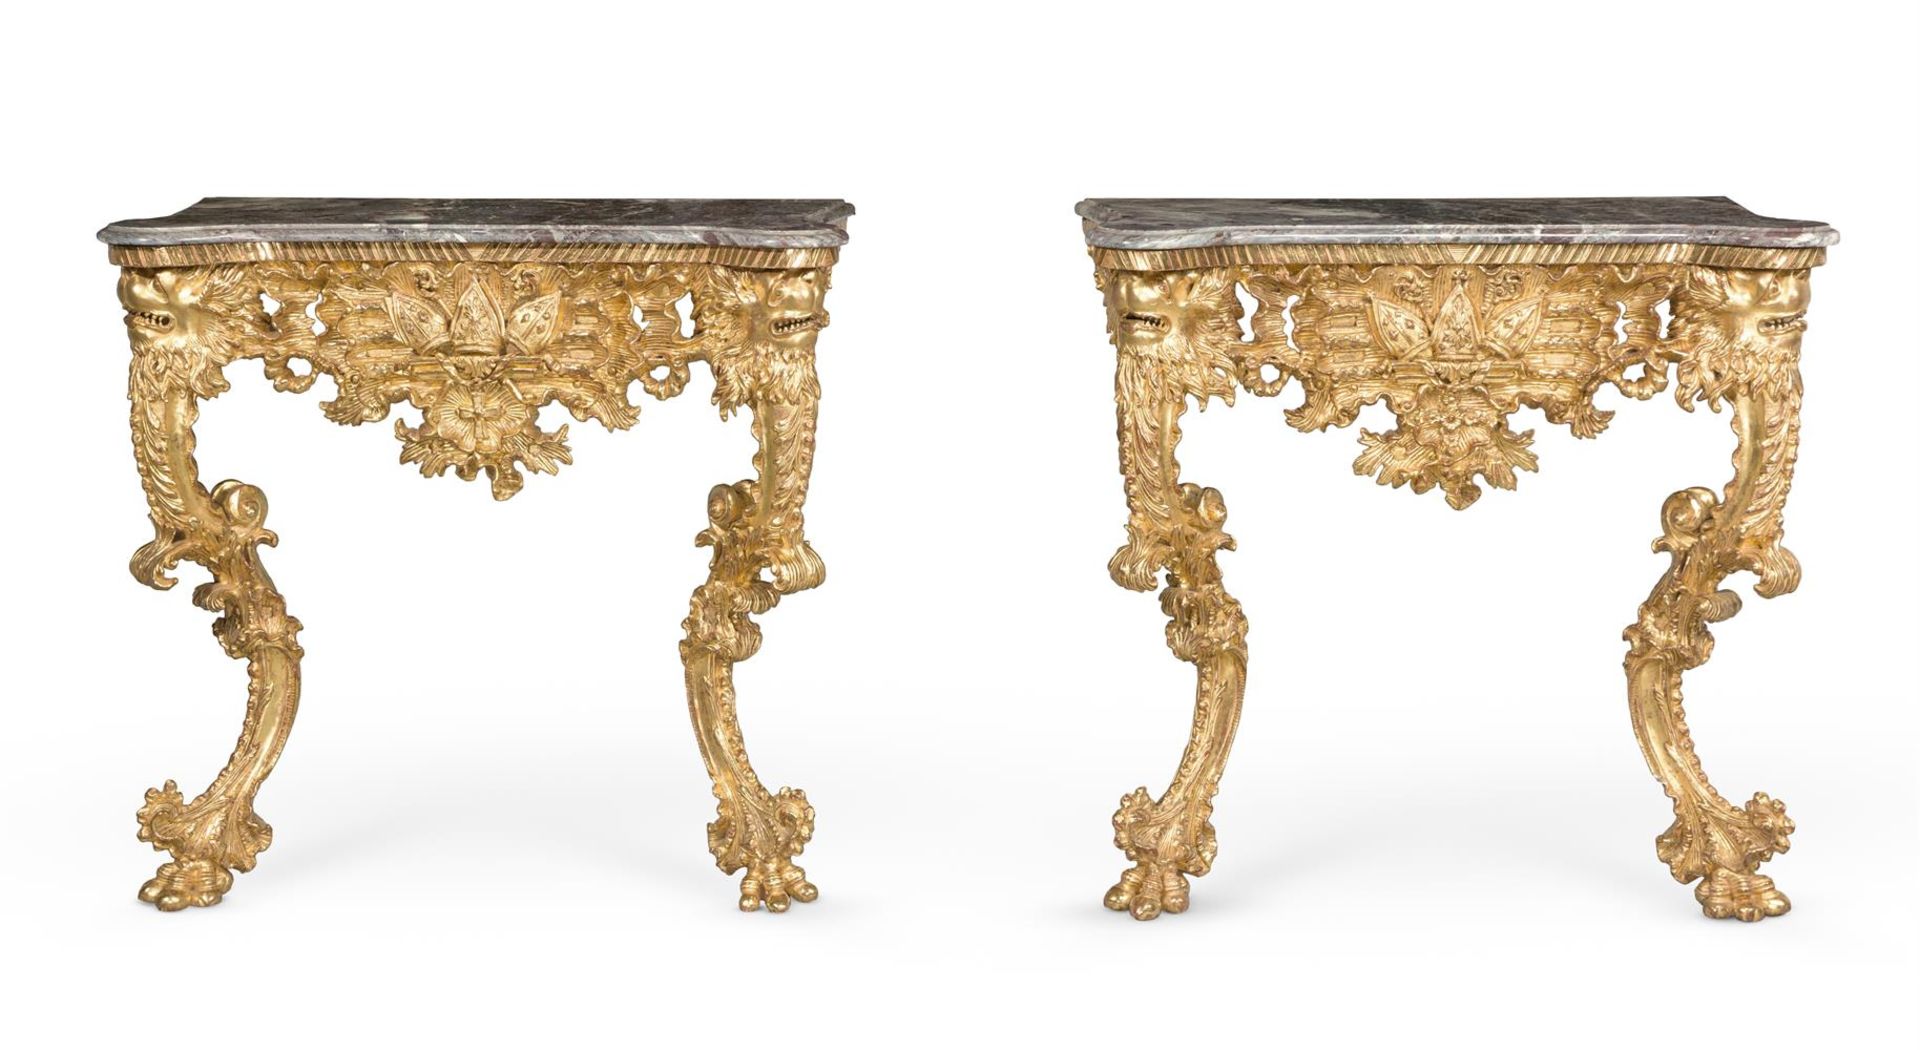 A PAIR OF ITALIAN CARVED GILTWOOD CONSOLE TABLES, MID 18TH CENTURY